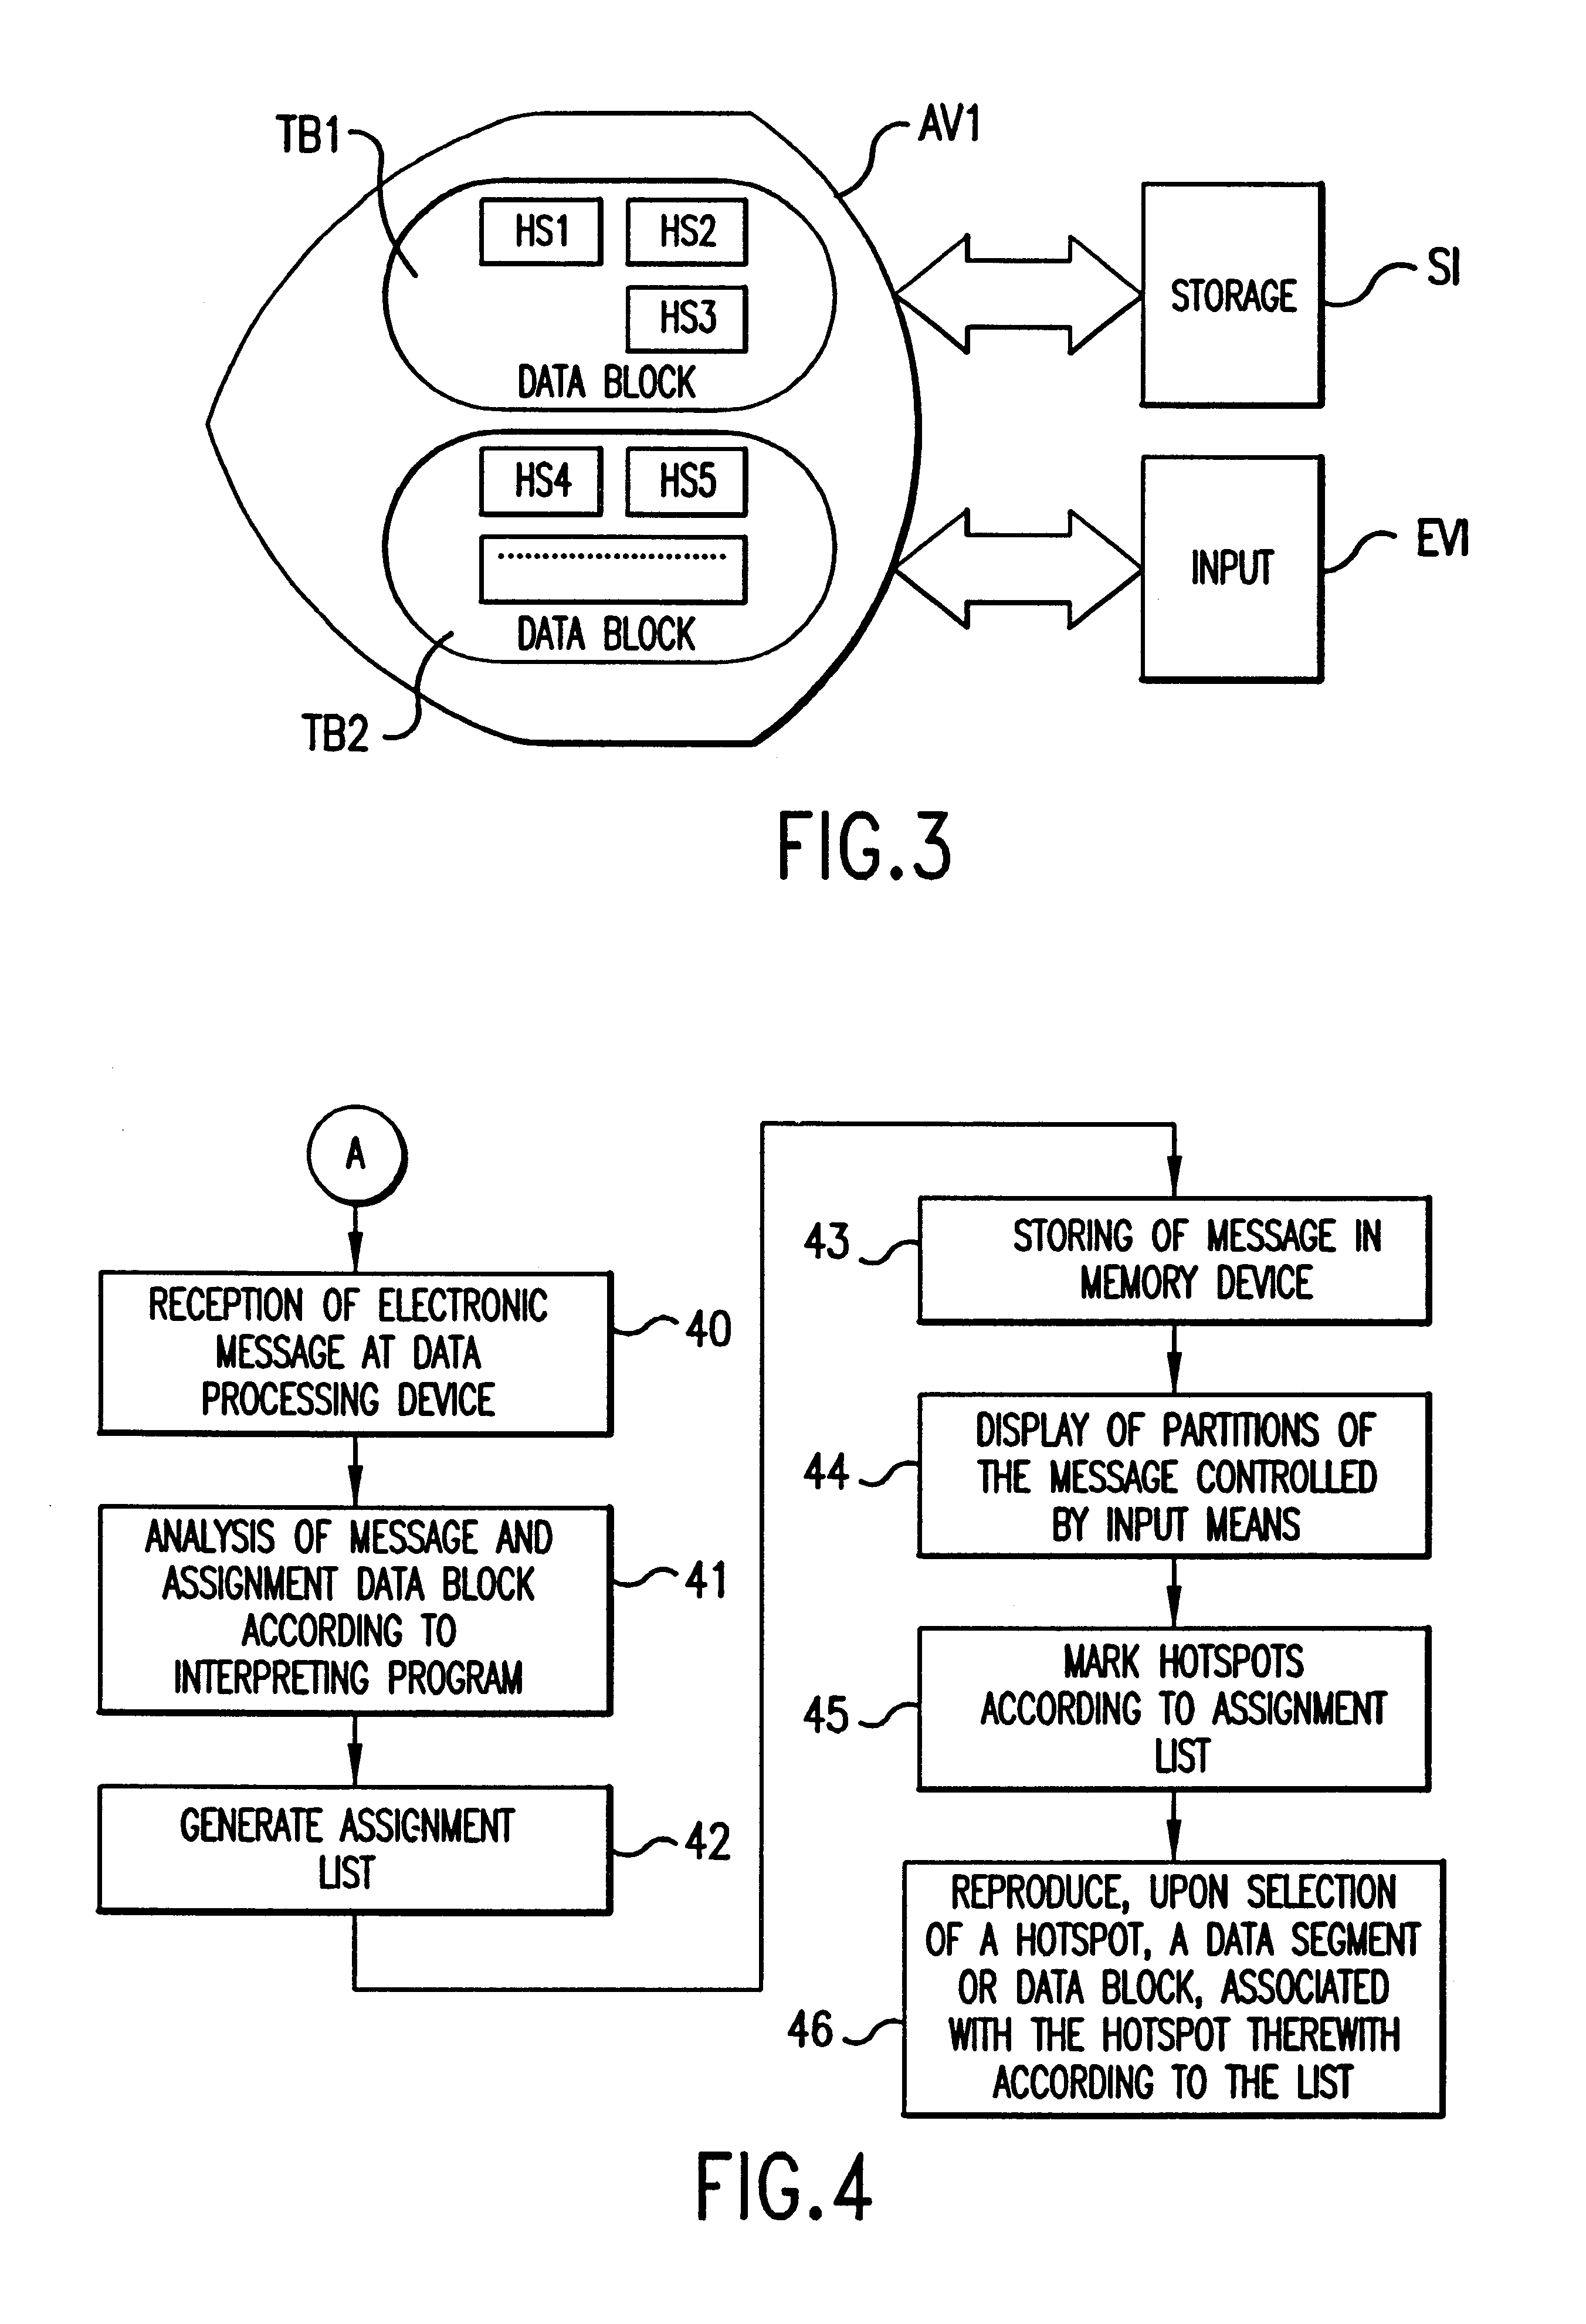 Communication system for electronic messages